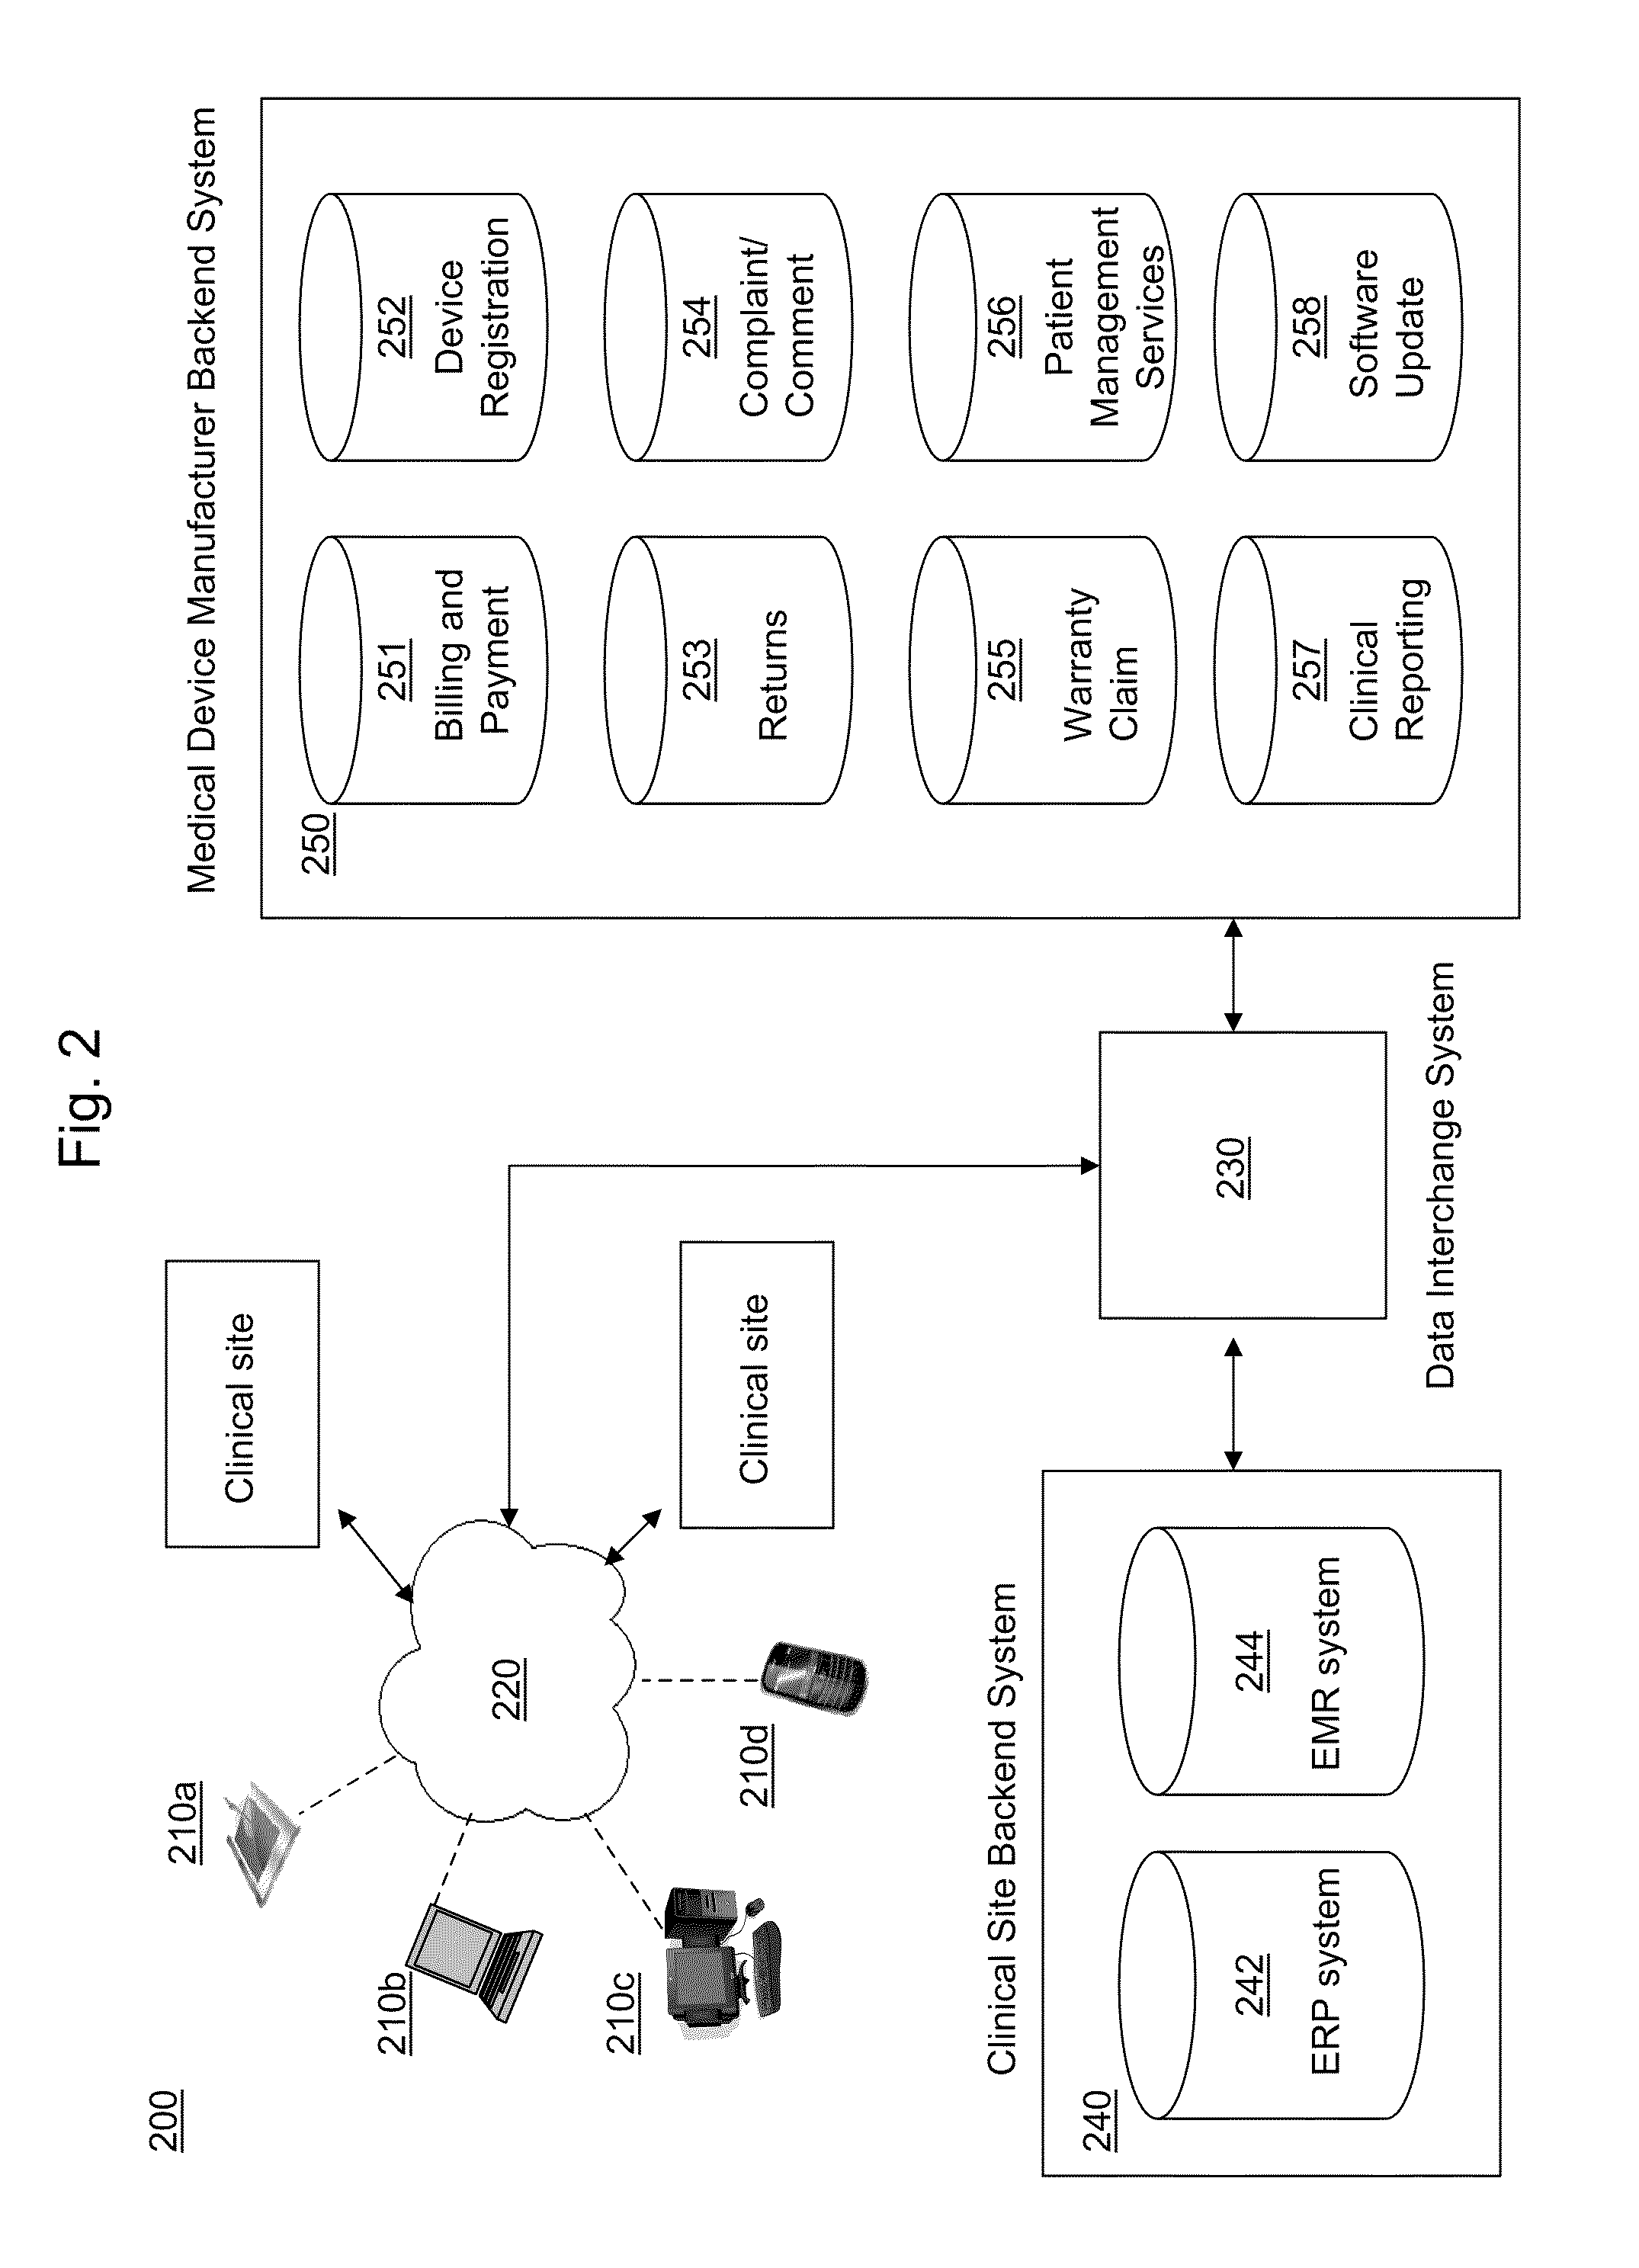 Integrated health care system for managing medical device information